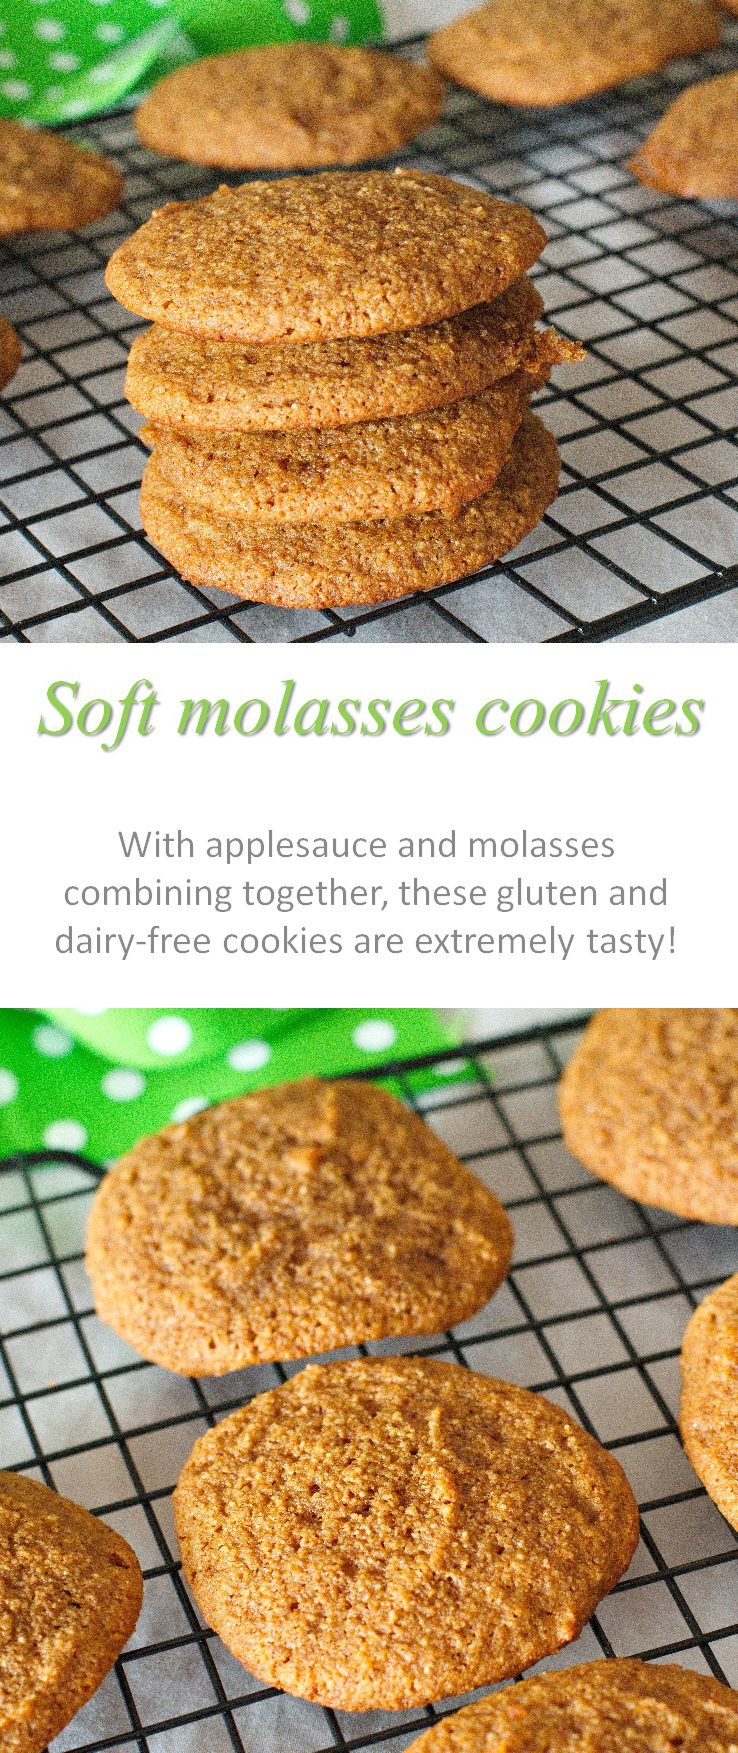 These soft molasses cookies are very soft, gluten and dairy-free with ginger and molasses, almost a marshmallow texture. #molasses